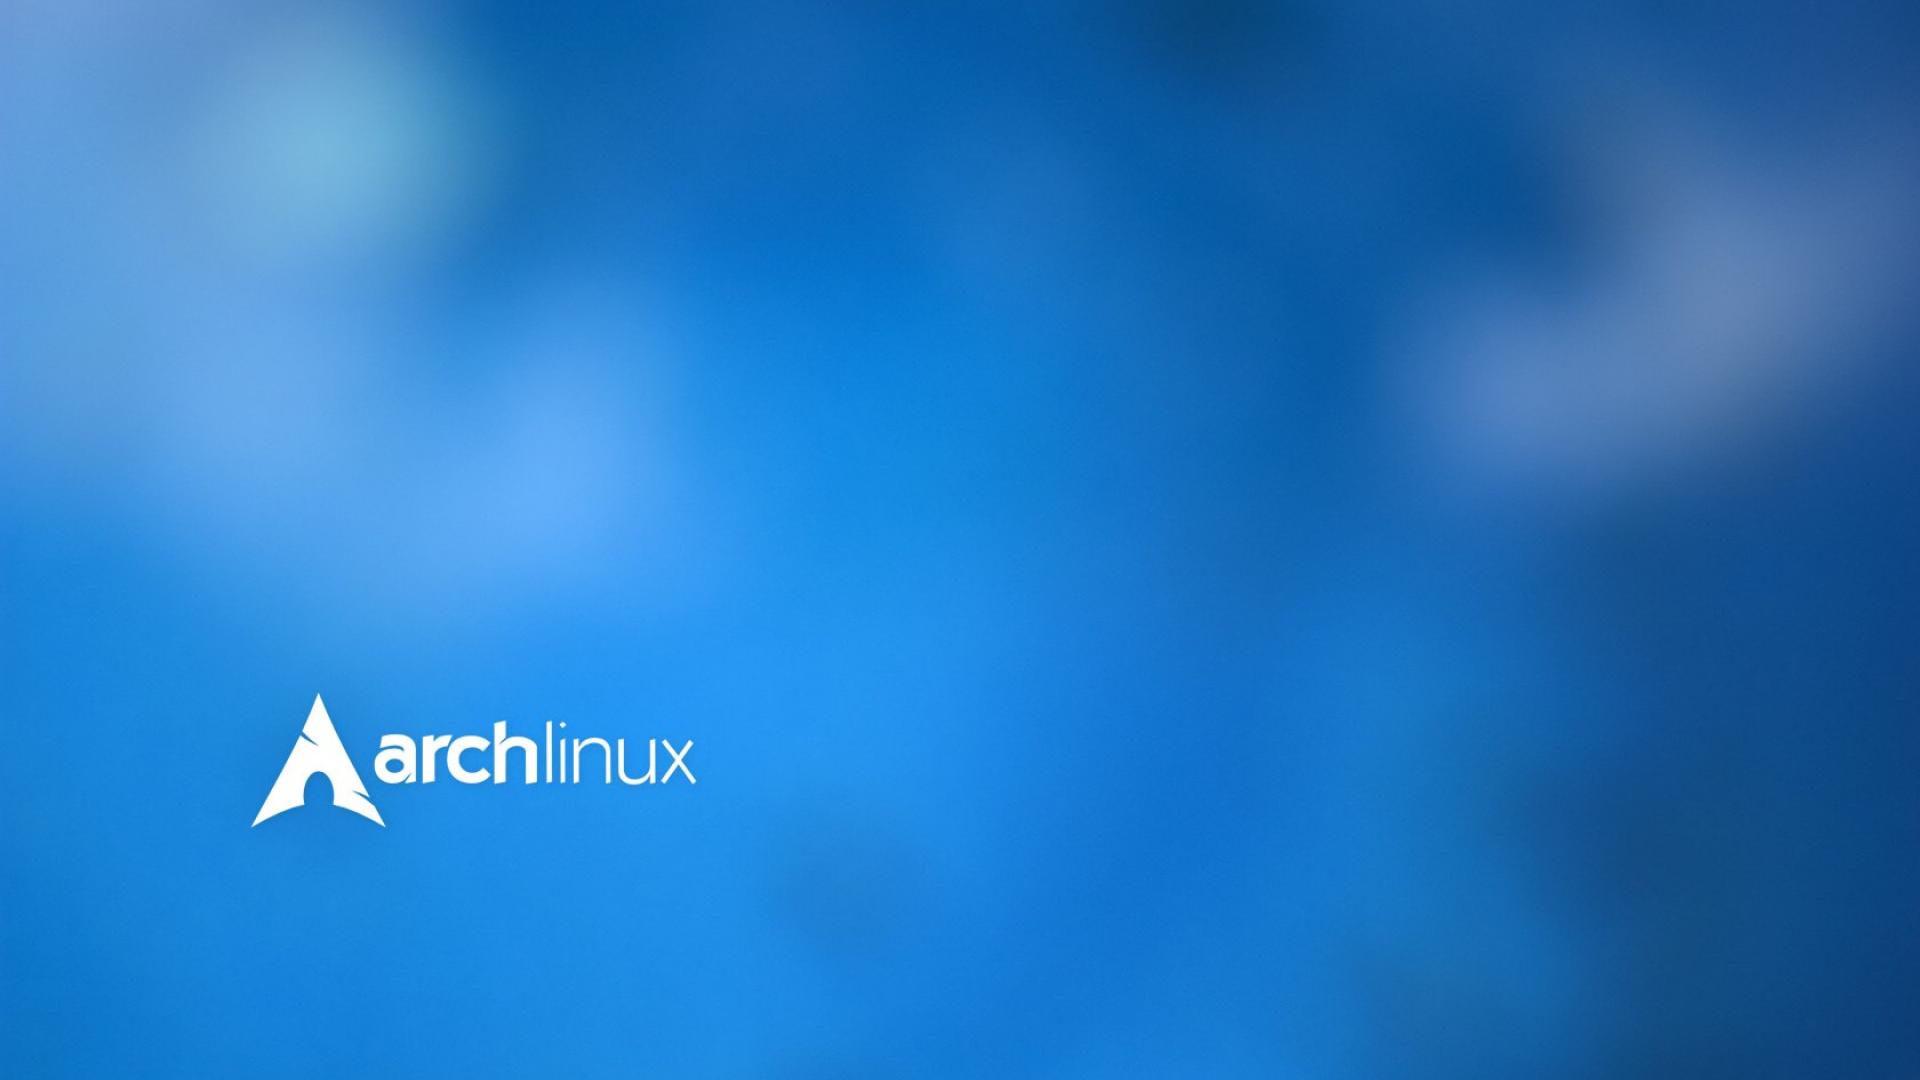 11 Latest Arch Linux Background Images Cool Background Collection